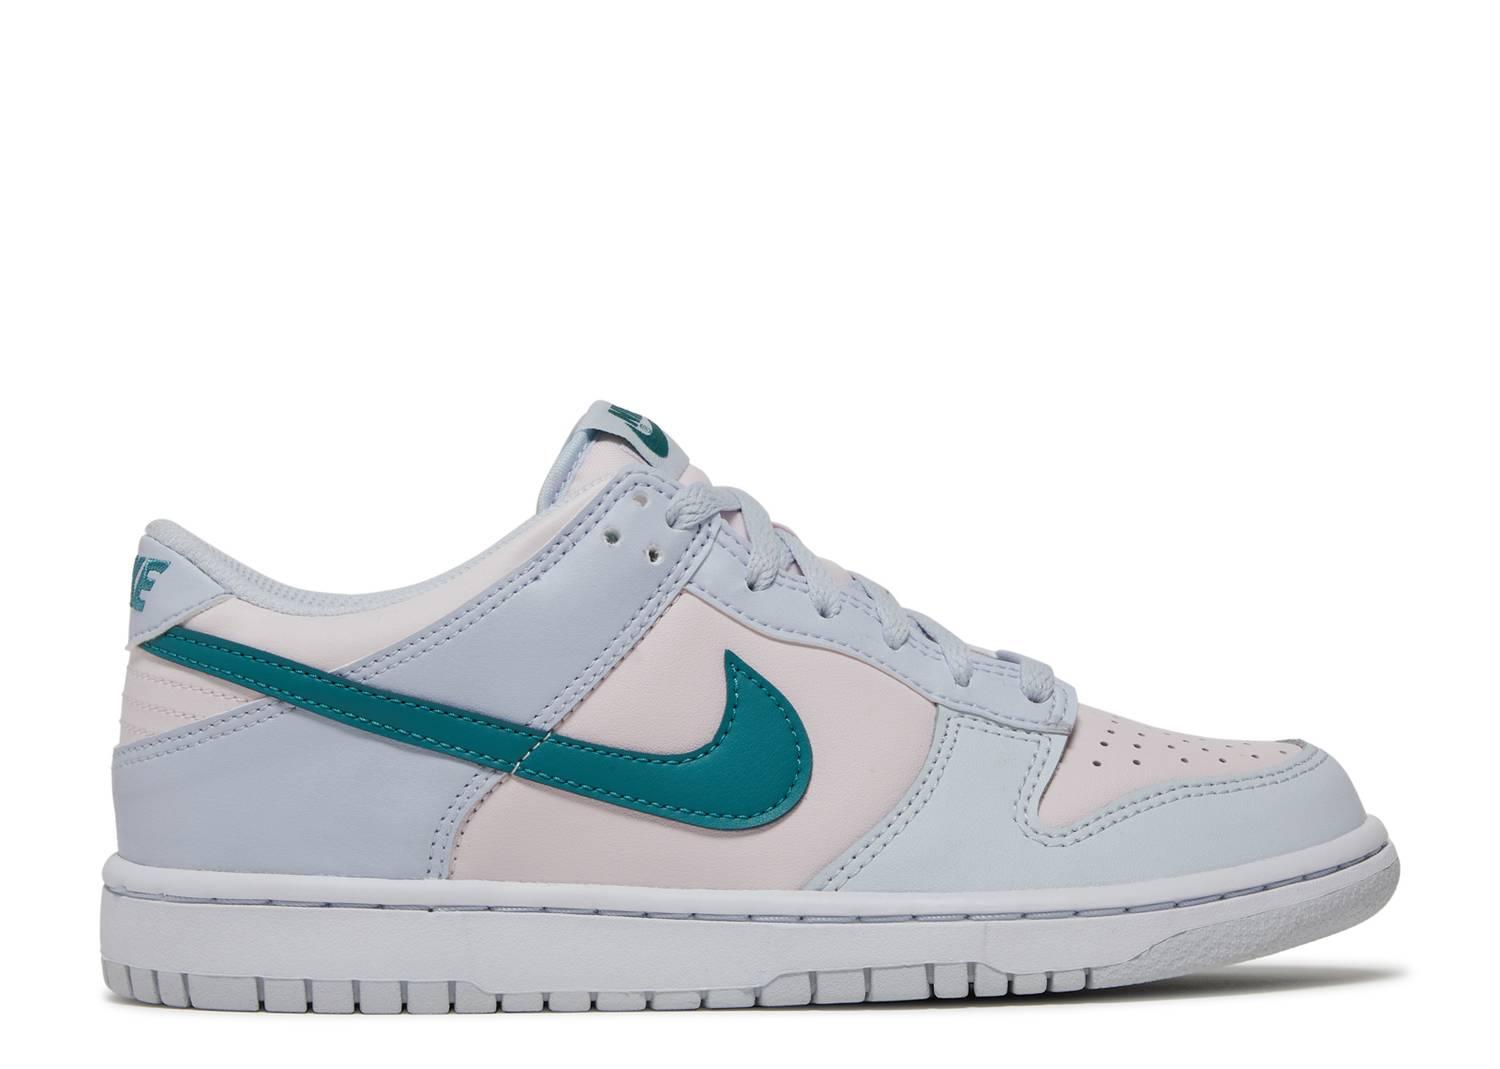 NIKE DUNK LOW GS 'MINERAL TEAL' - Kicksinto